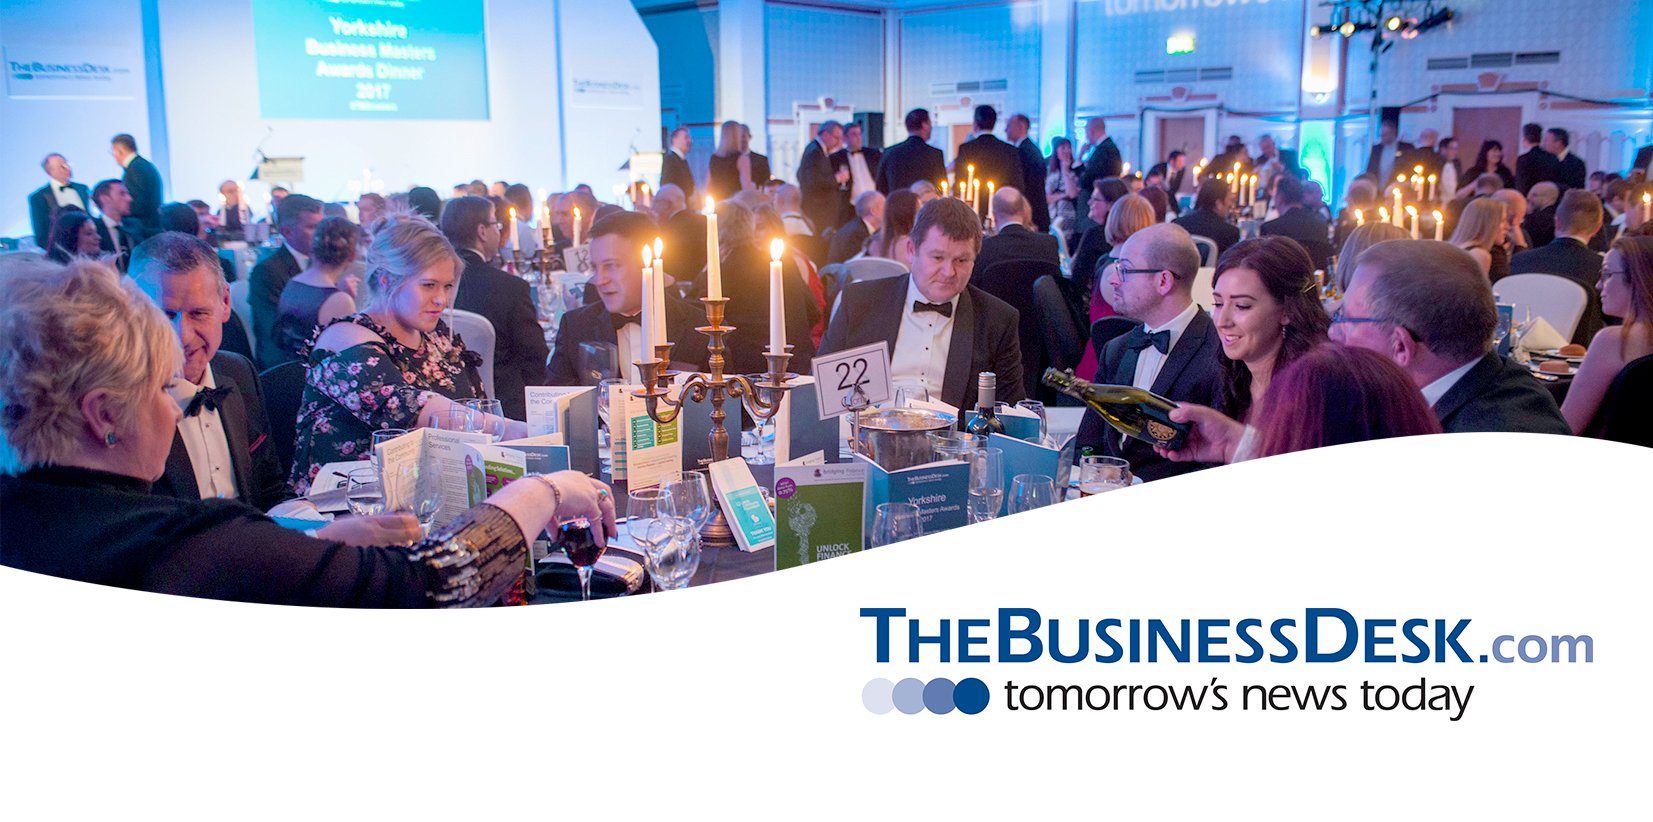 Shortlisted for Business Master